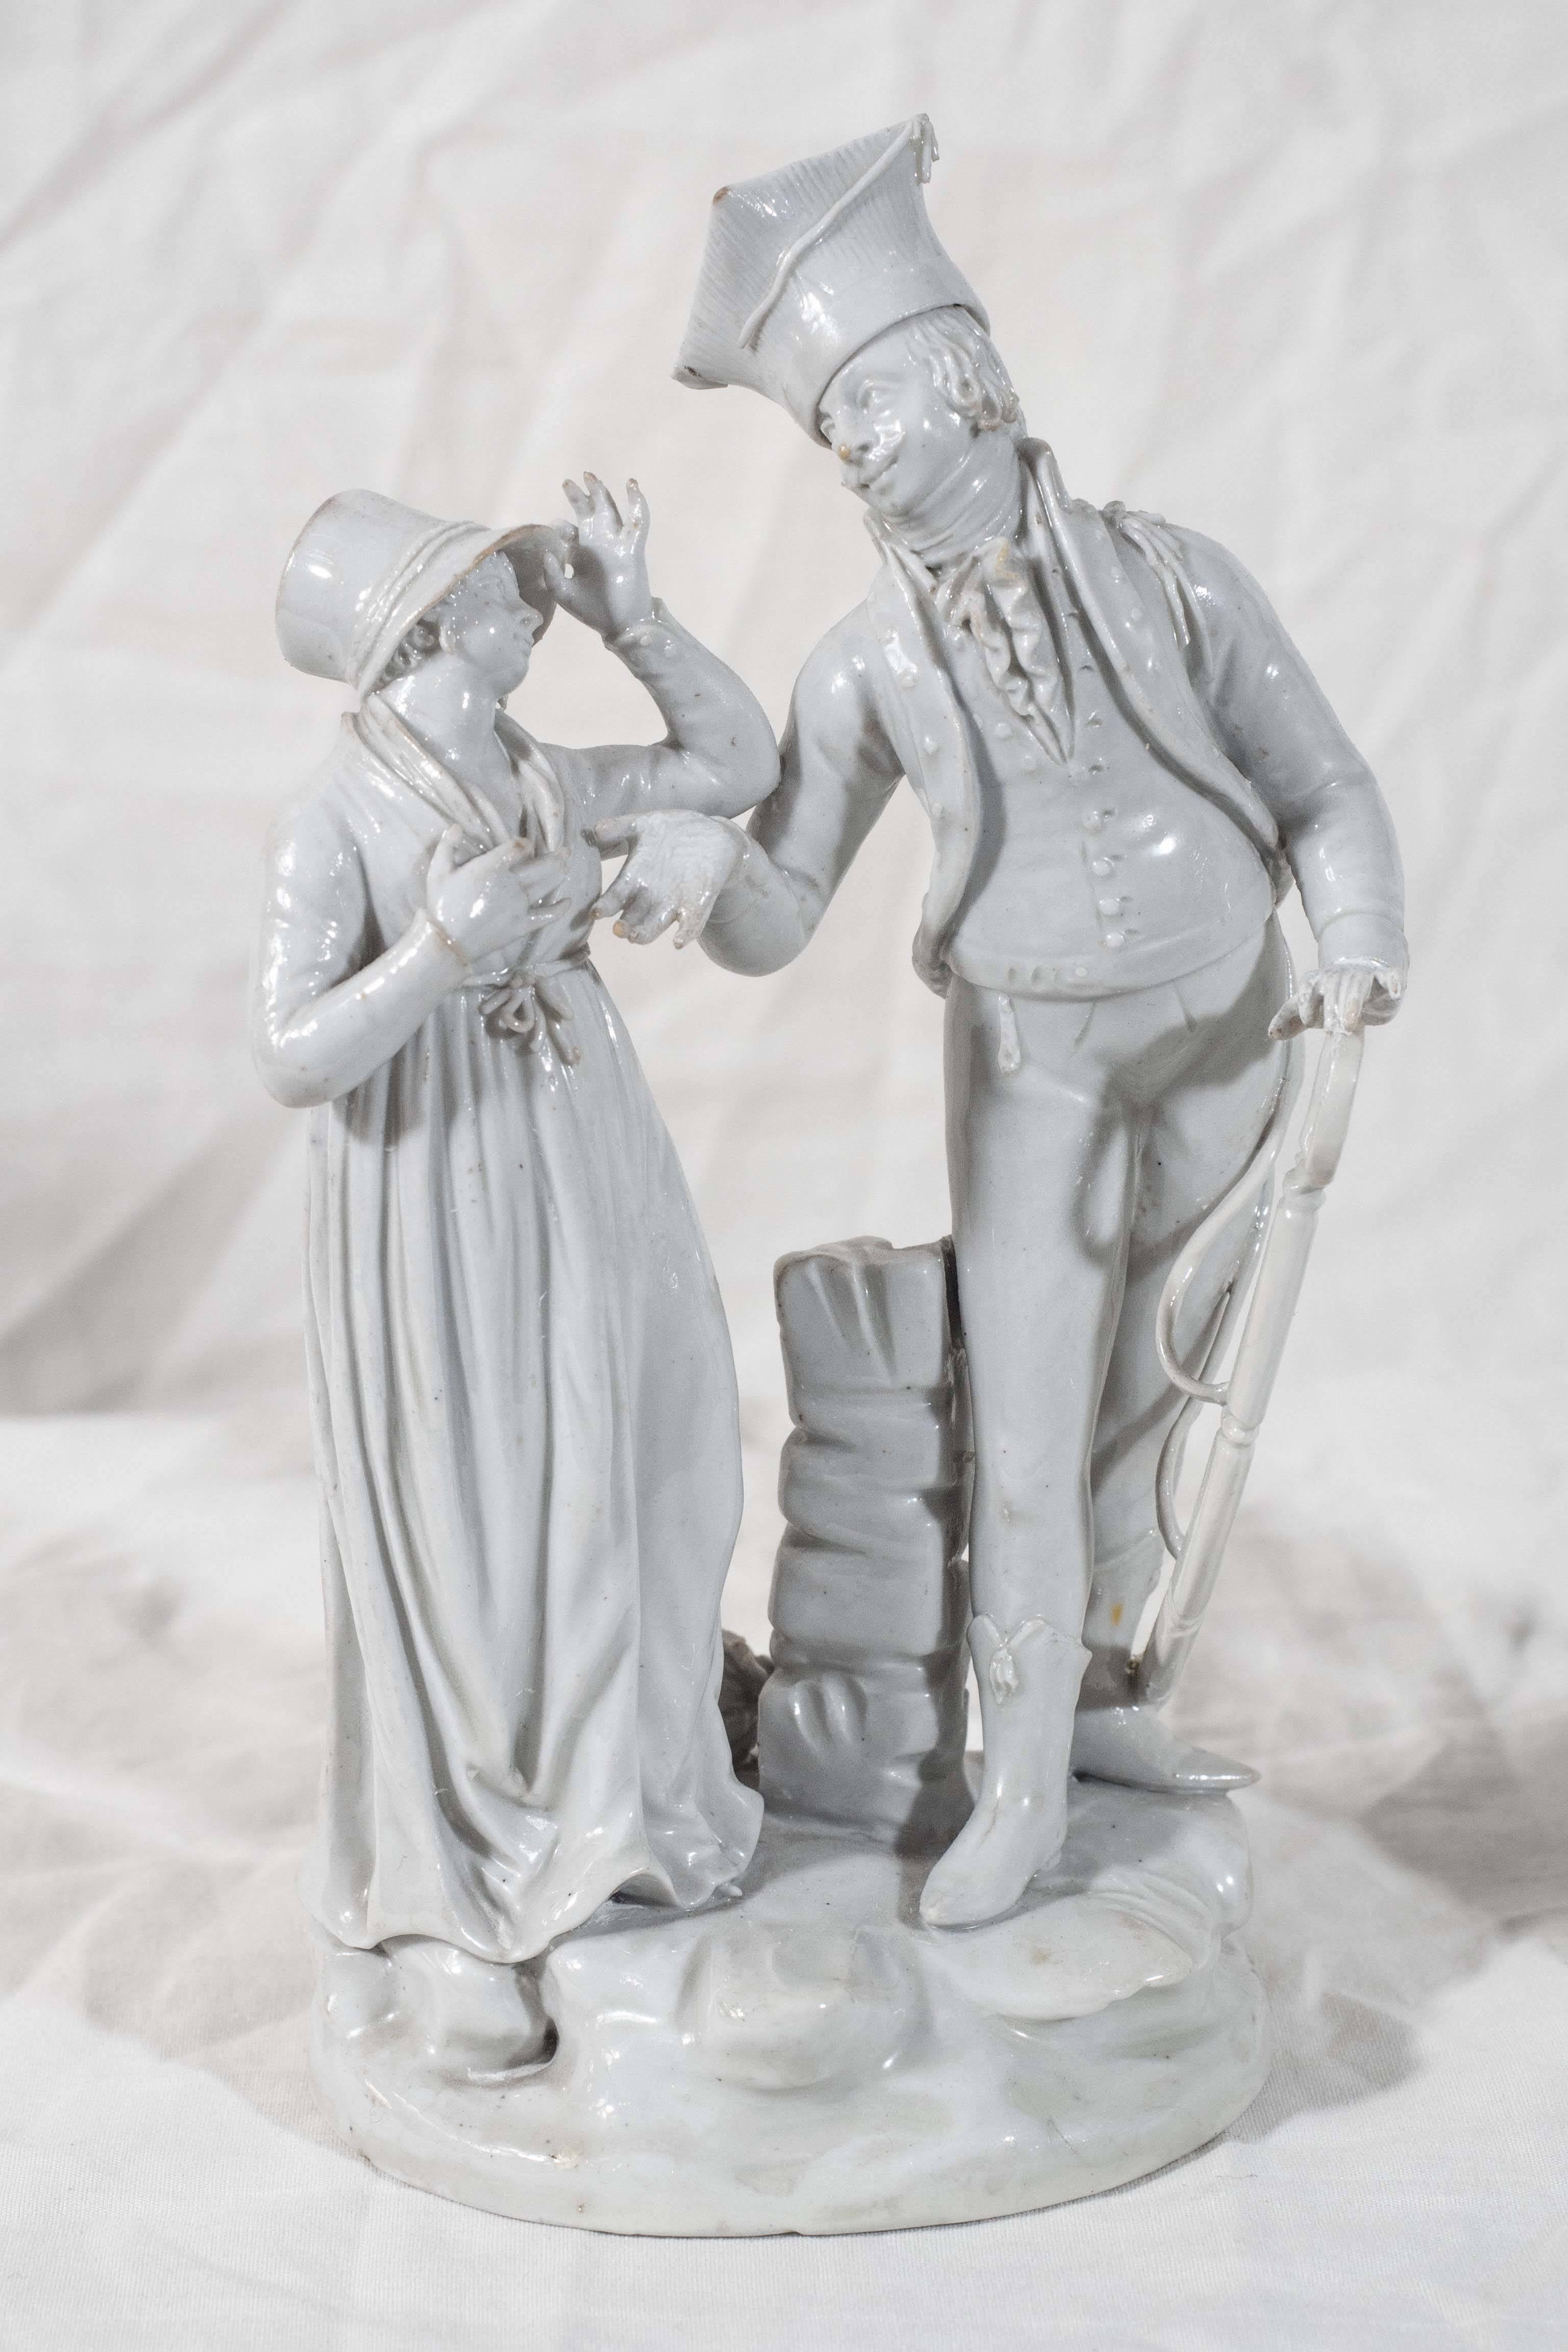 Provenance: The Metropolitan Museum in New York has a similar Le Nove Porcelain pair of courting figures in its collection. Accession Number: 06.381. Factory: Le Nove manufactory. Date: circa 1810.  
This exceptional pair of two antique porcelain